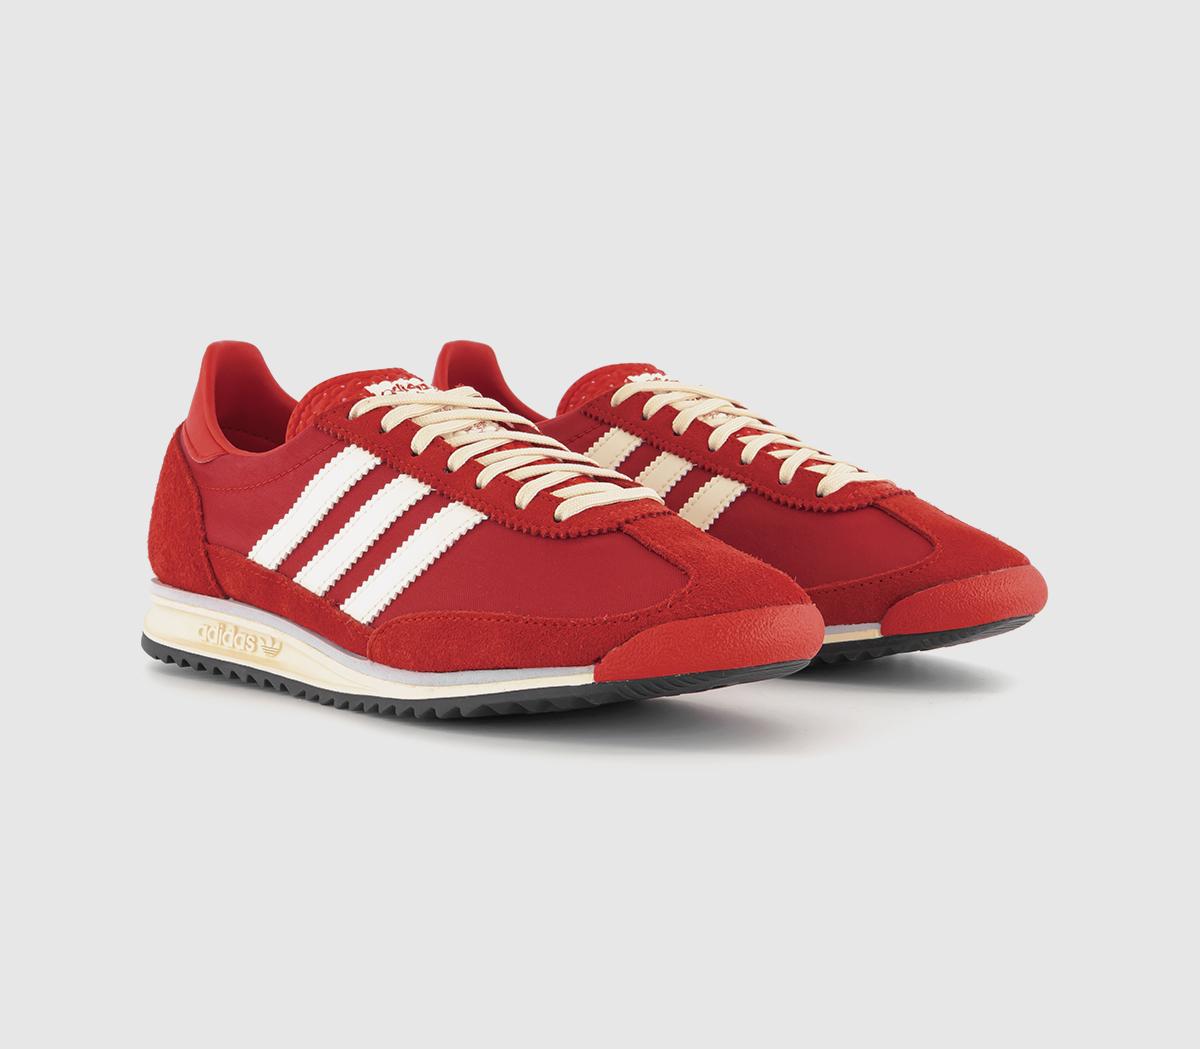 Adidas SL 72 Trainers Scarlet Red White Black, 8